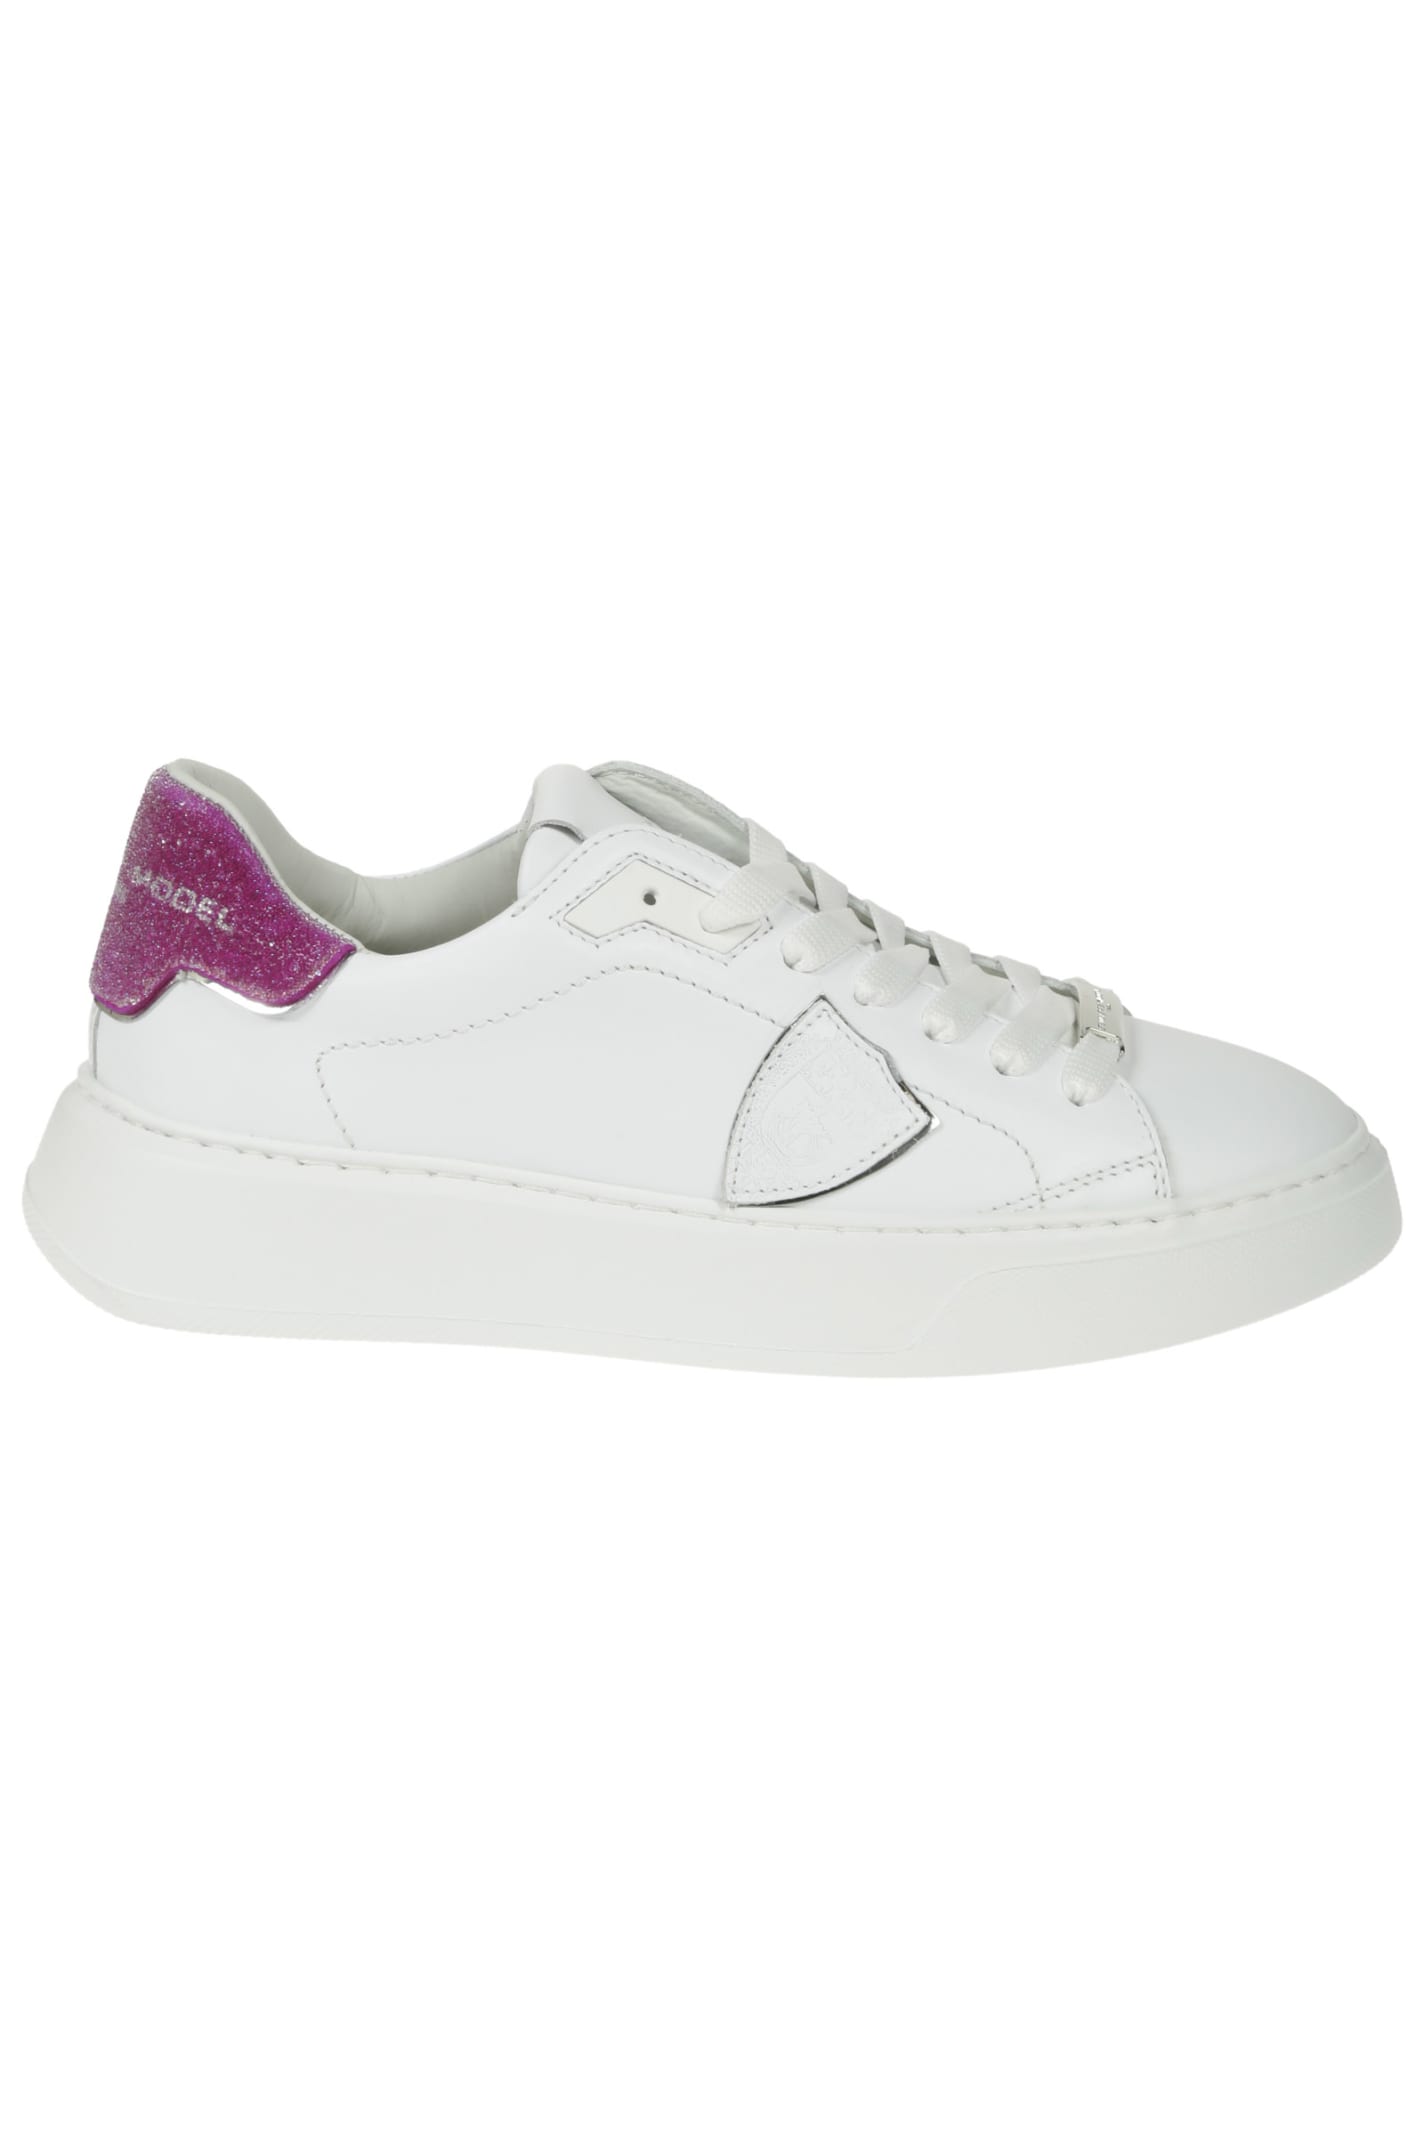 Philippe Model Temple Low Micro Sneakers